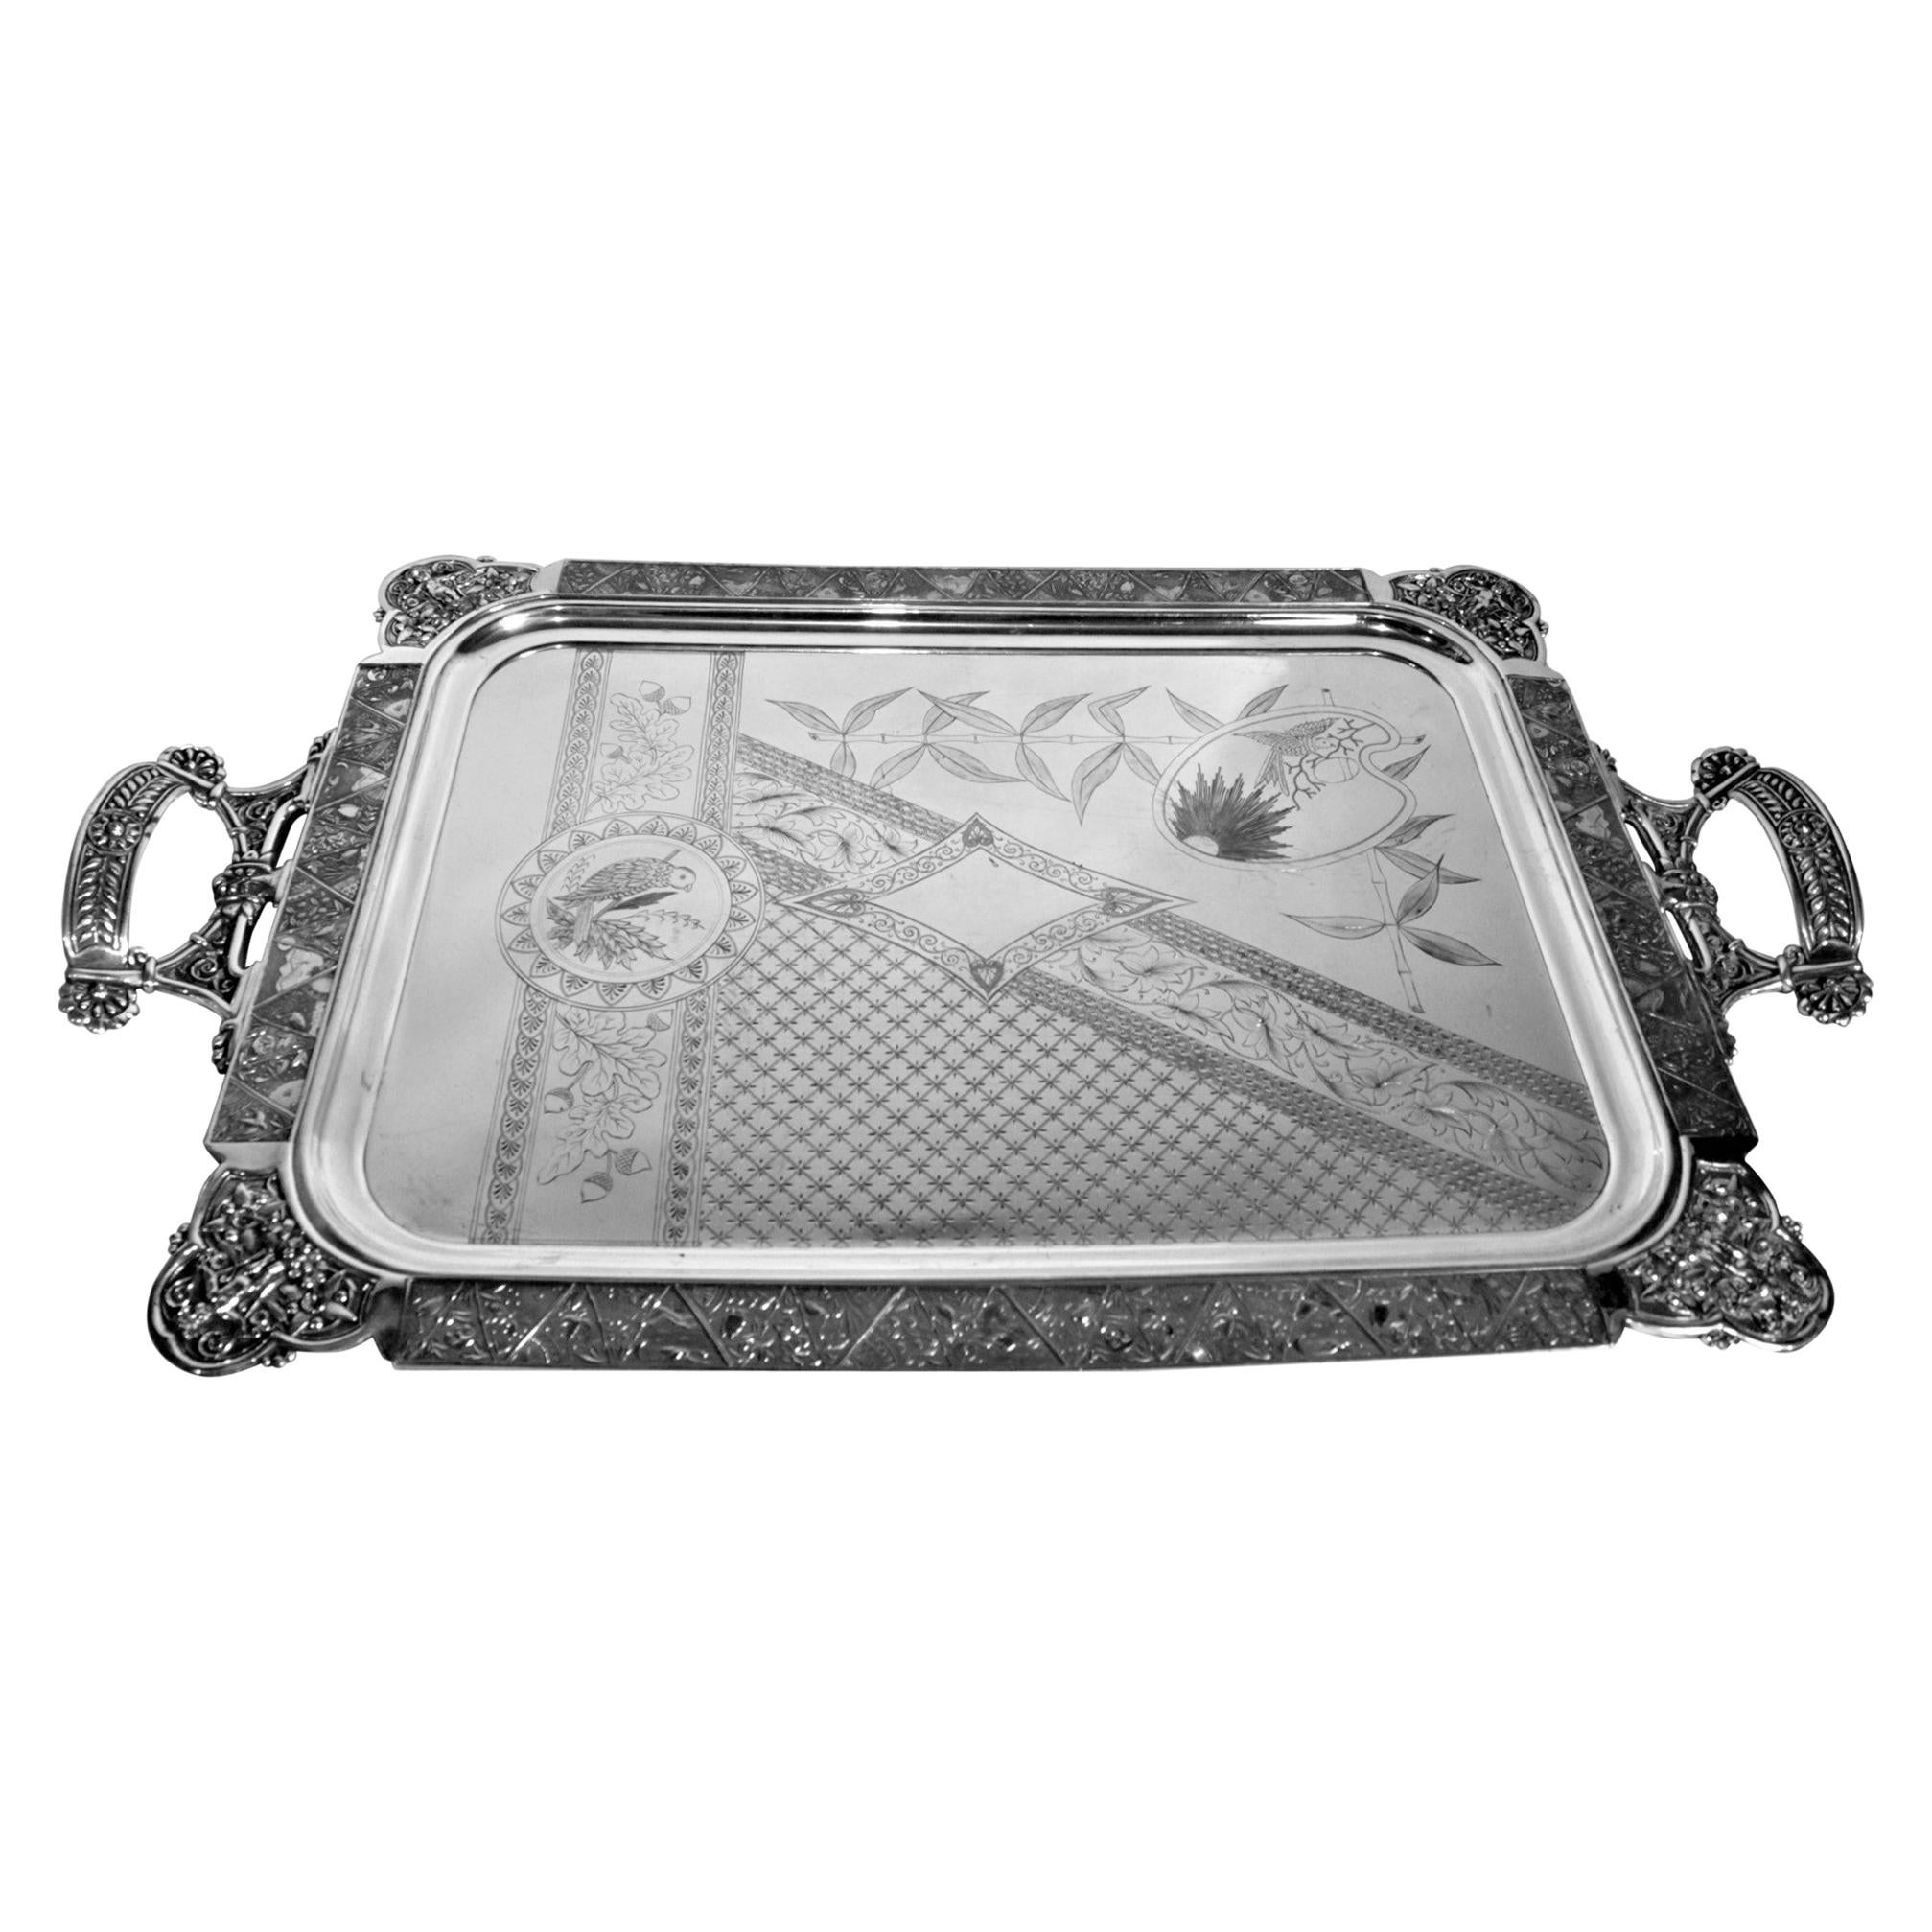 Large Silver Plated Serving Tray with Ornate Engraved Birds, Cherubs and Flowers